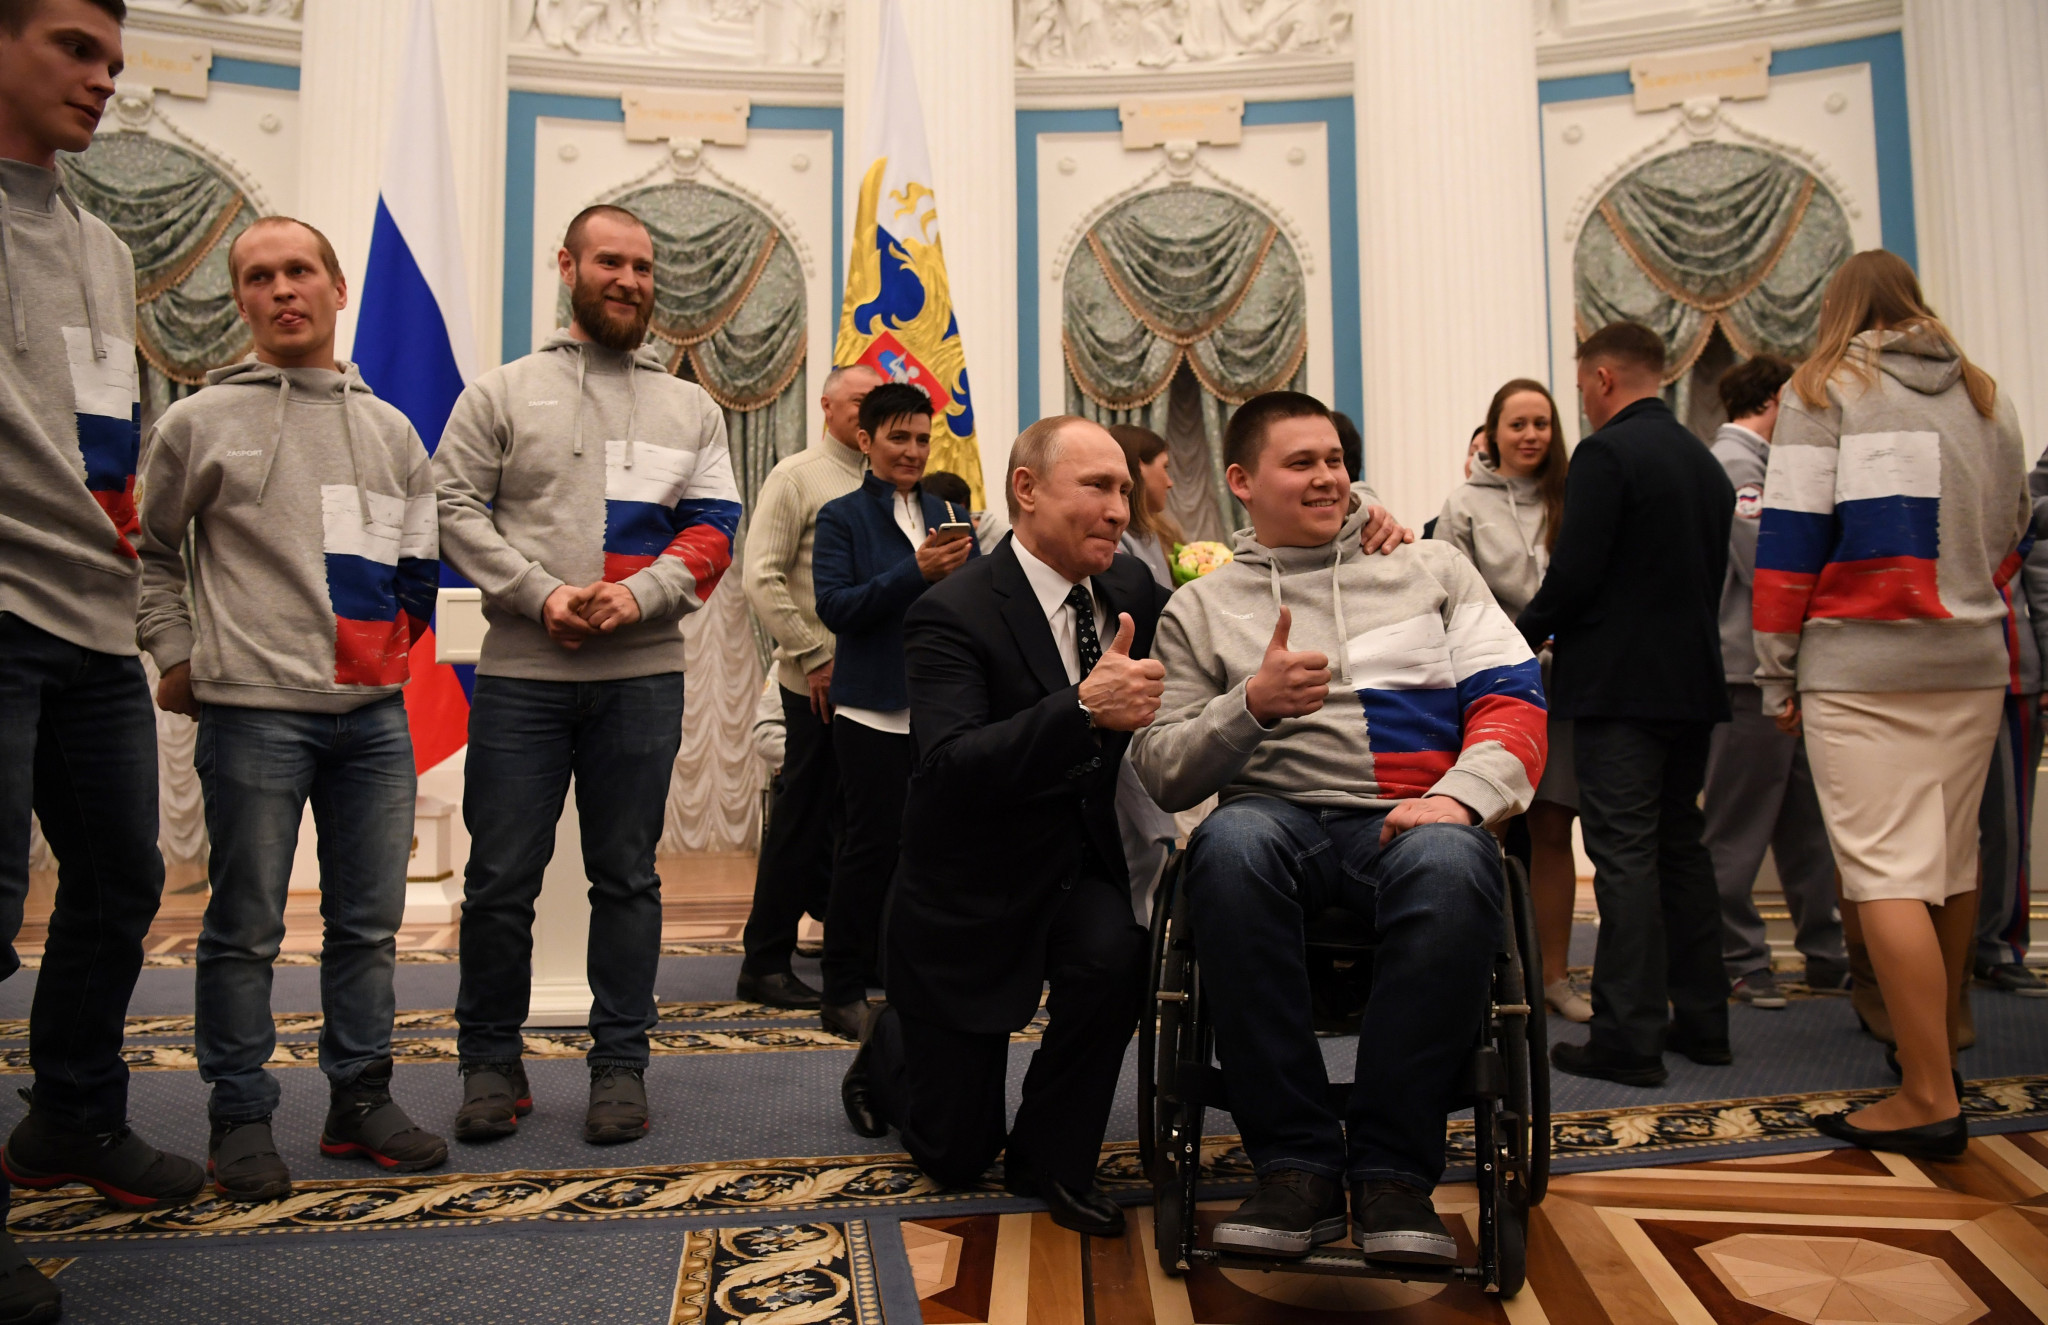 Putin holds reception for Pyeongchang 2018 Paralympic participants 